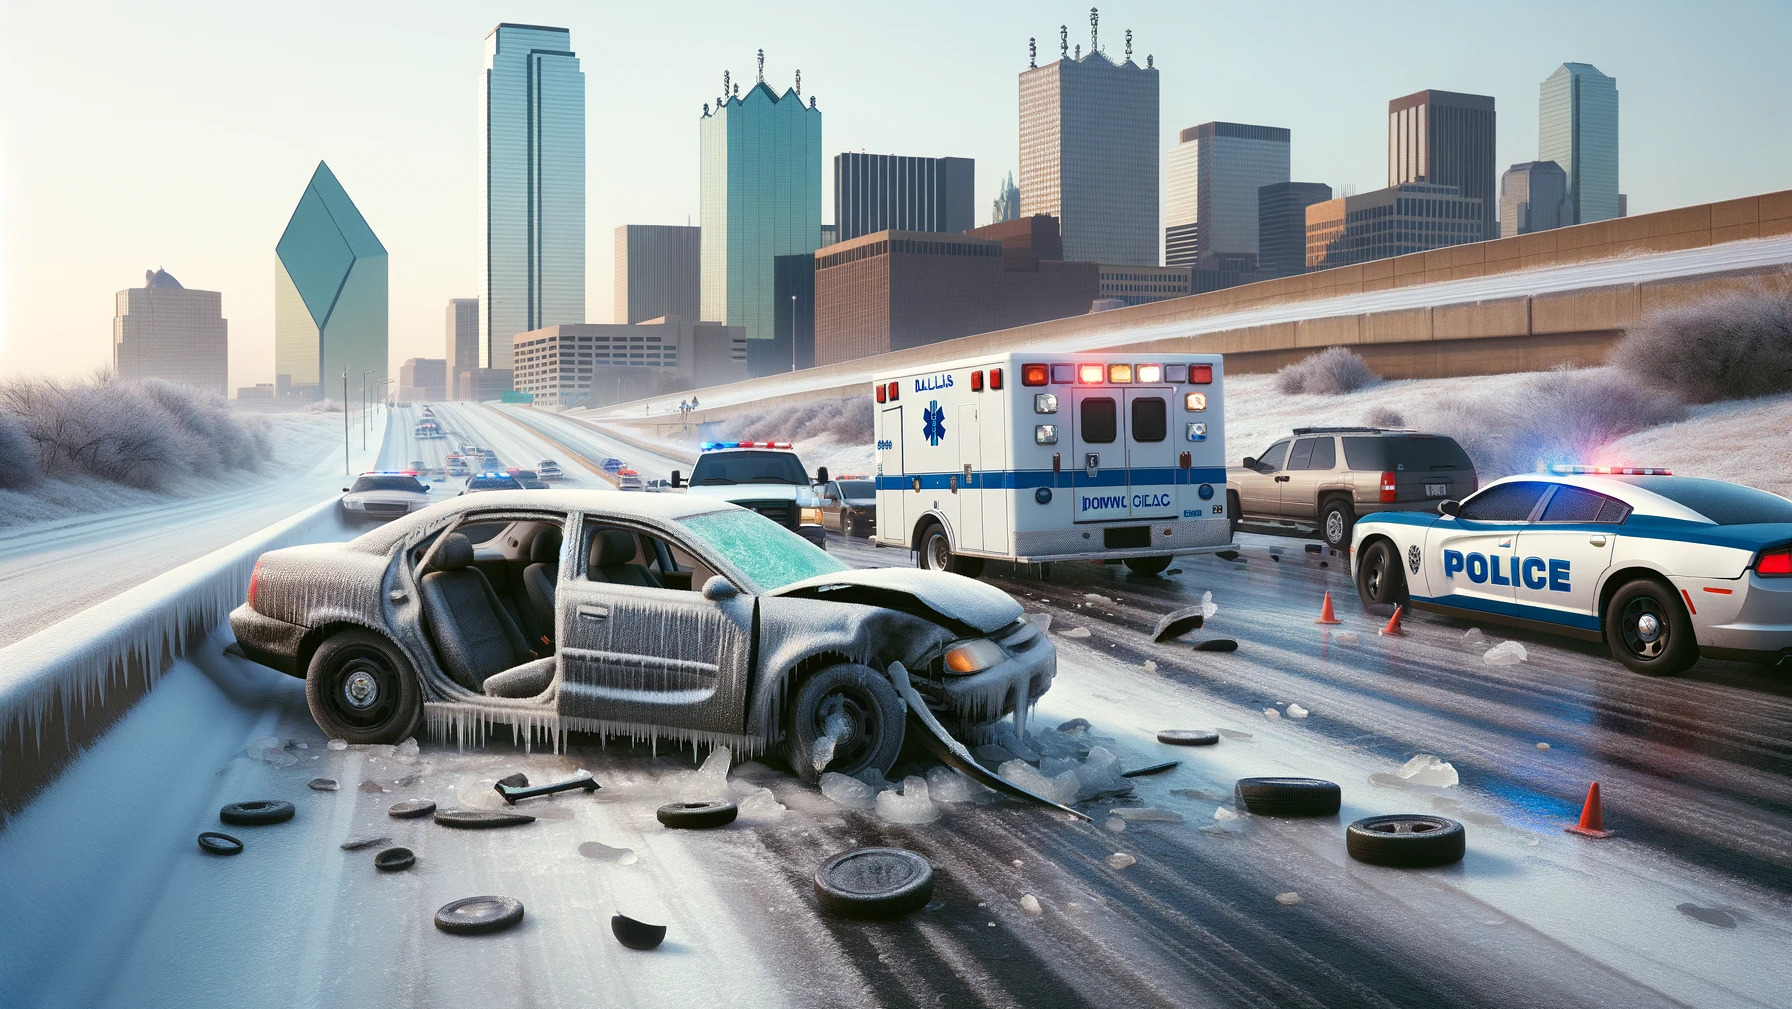 Car wreck near downtown dallas because of icy road.